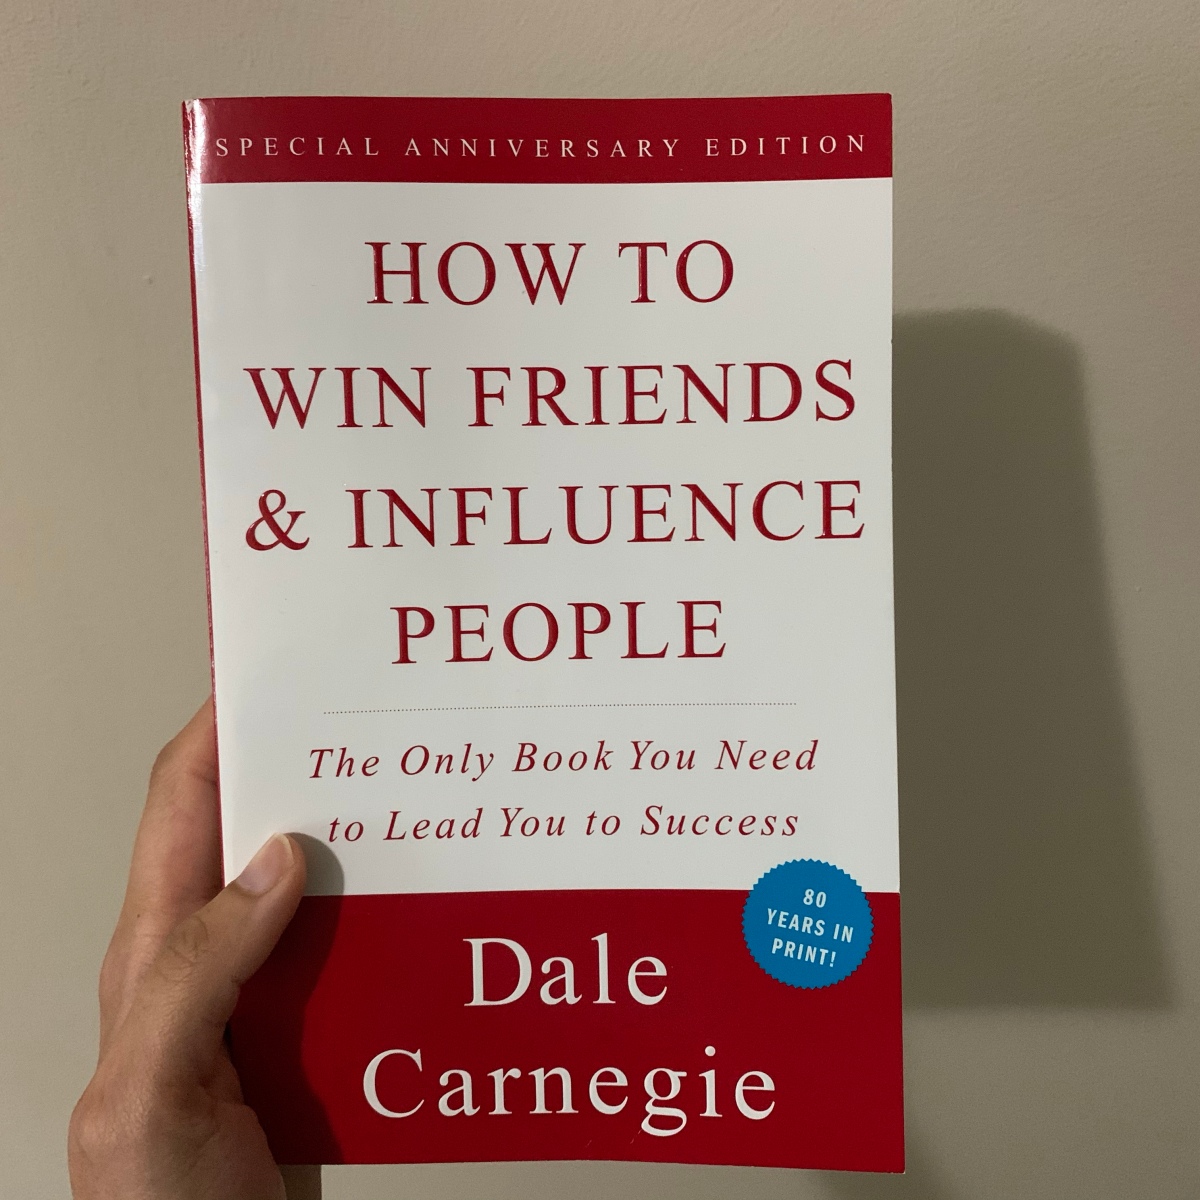 ‘How to Win Friends and Influence People’ by Dale Carnegie